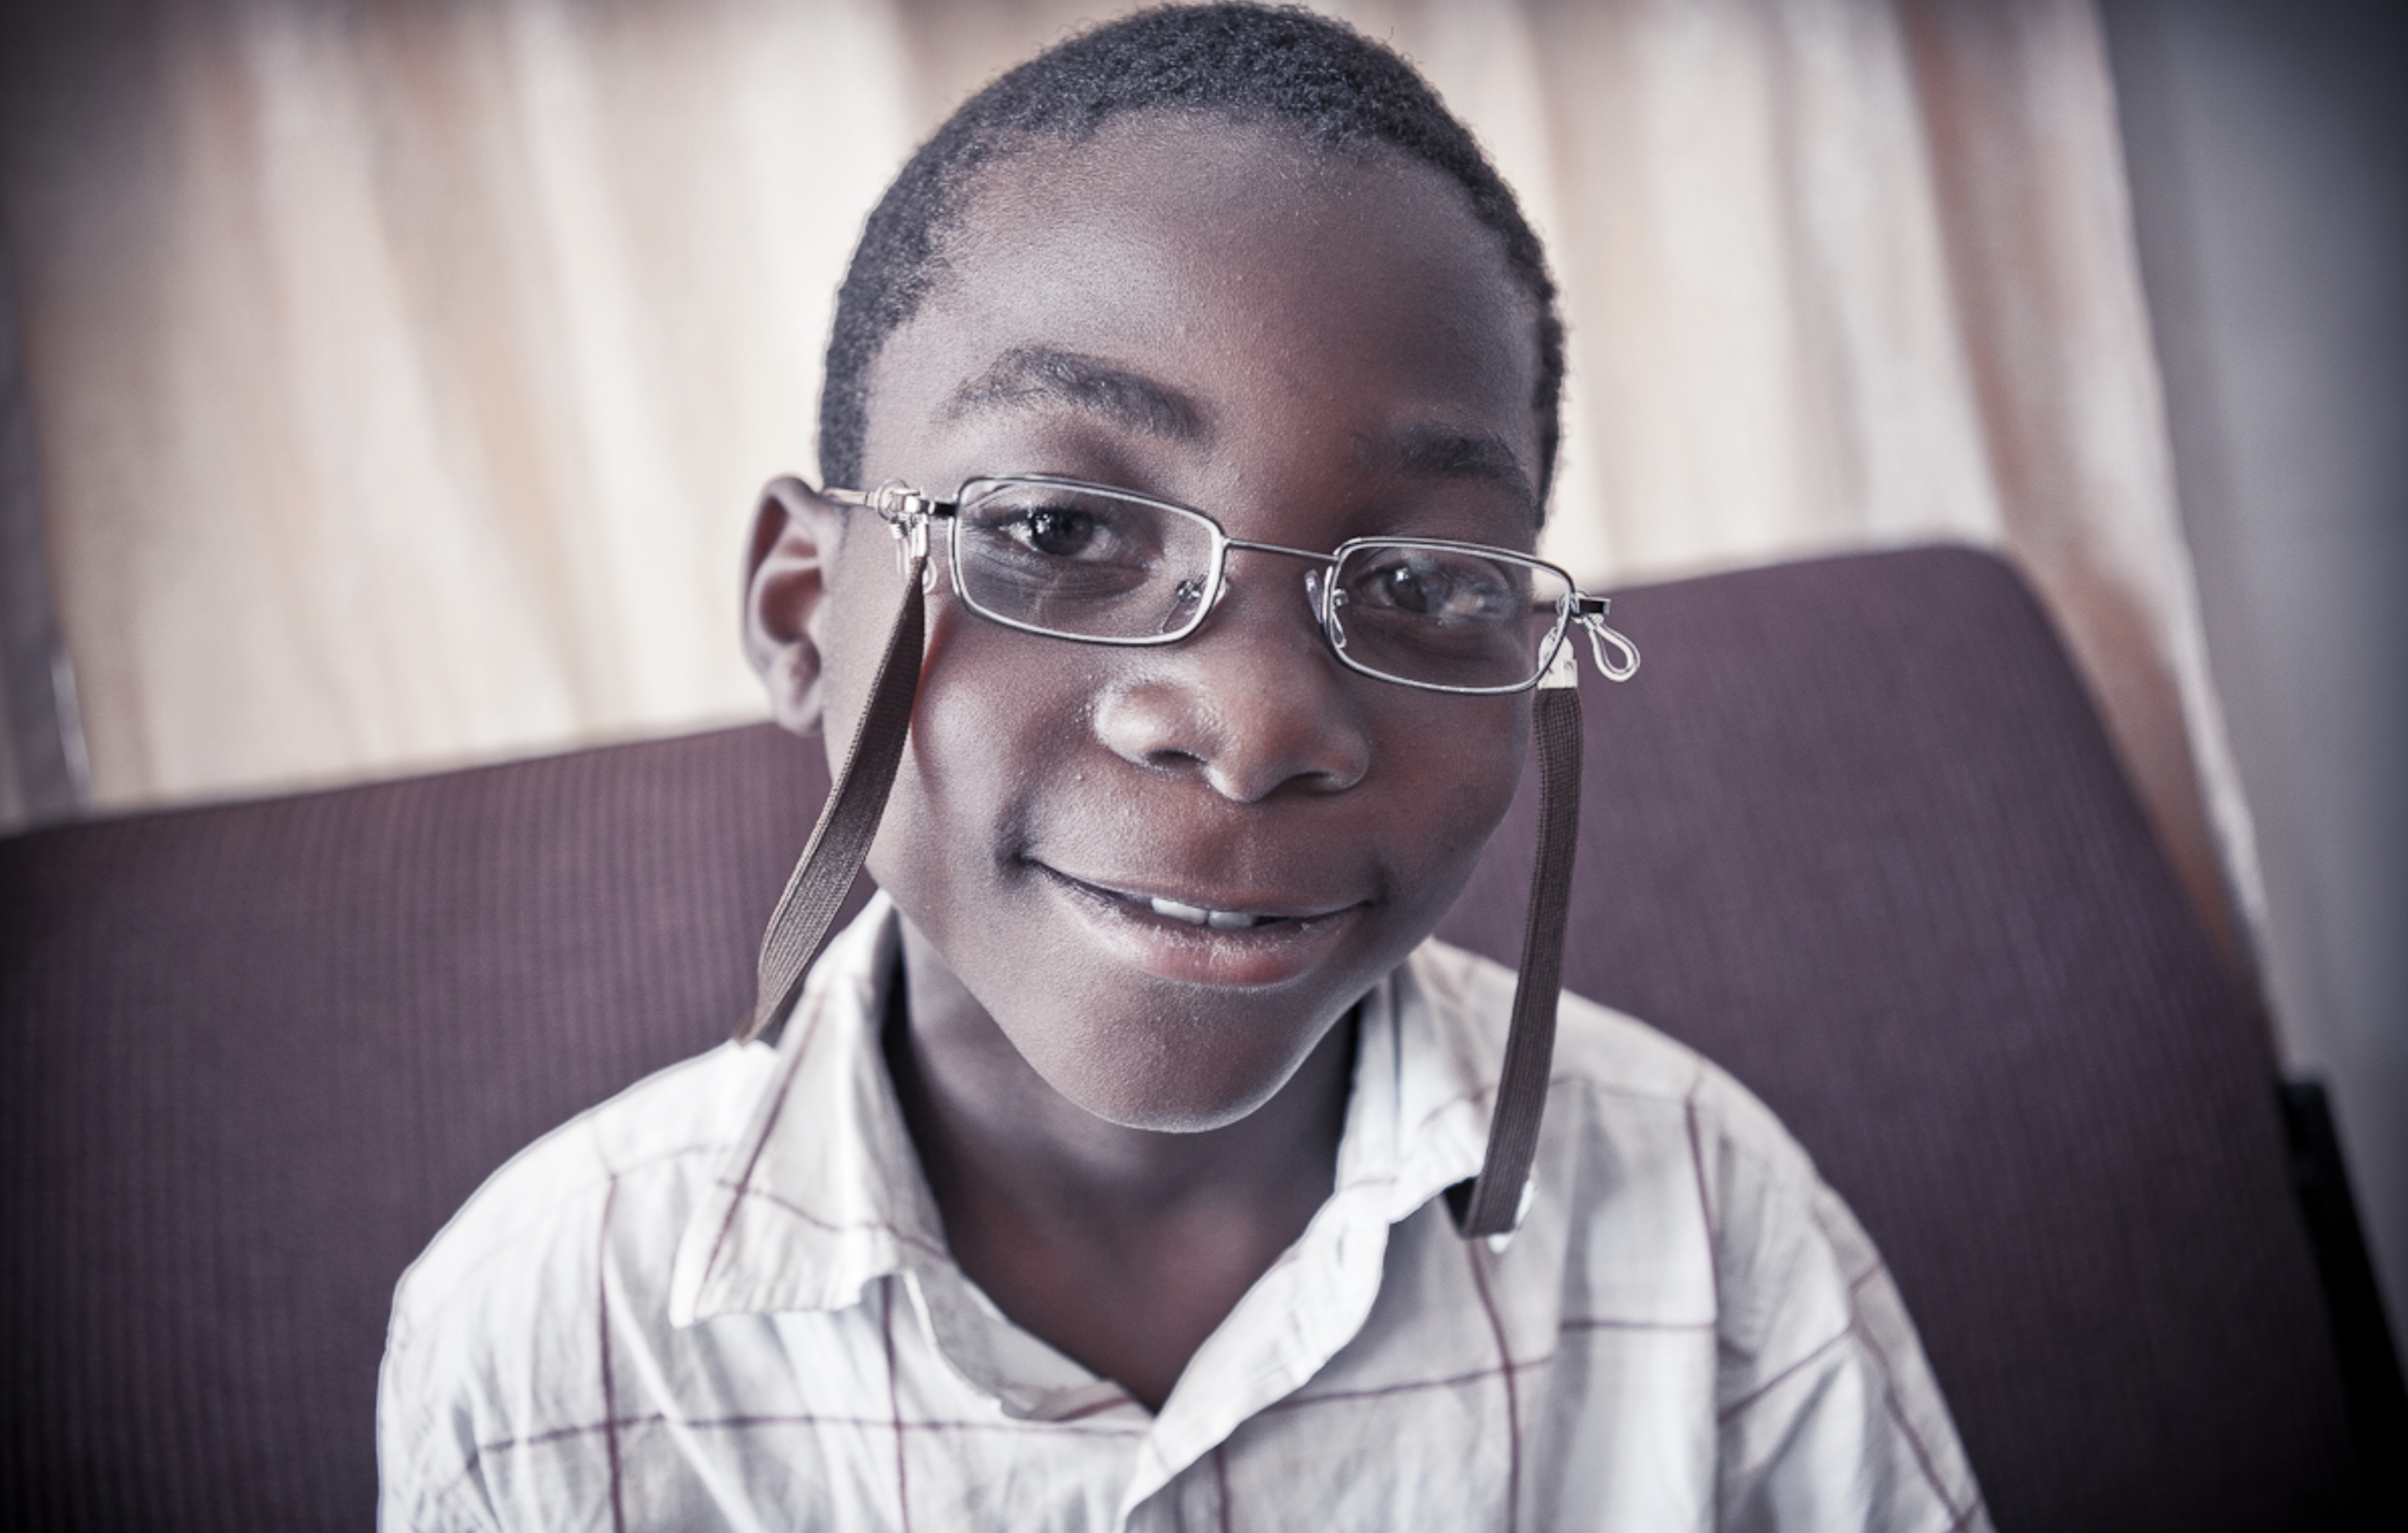  Follow-up care and the provision of glasses are important parts of fighting childhood blindness 